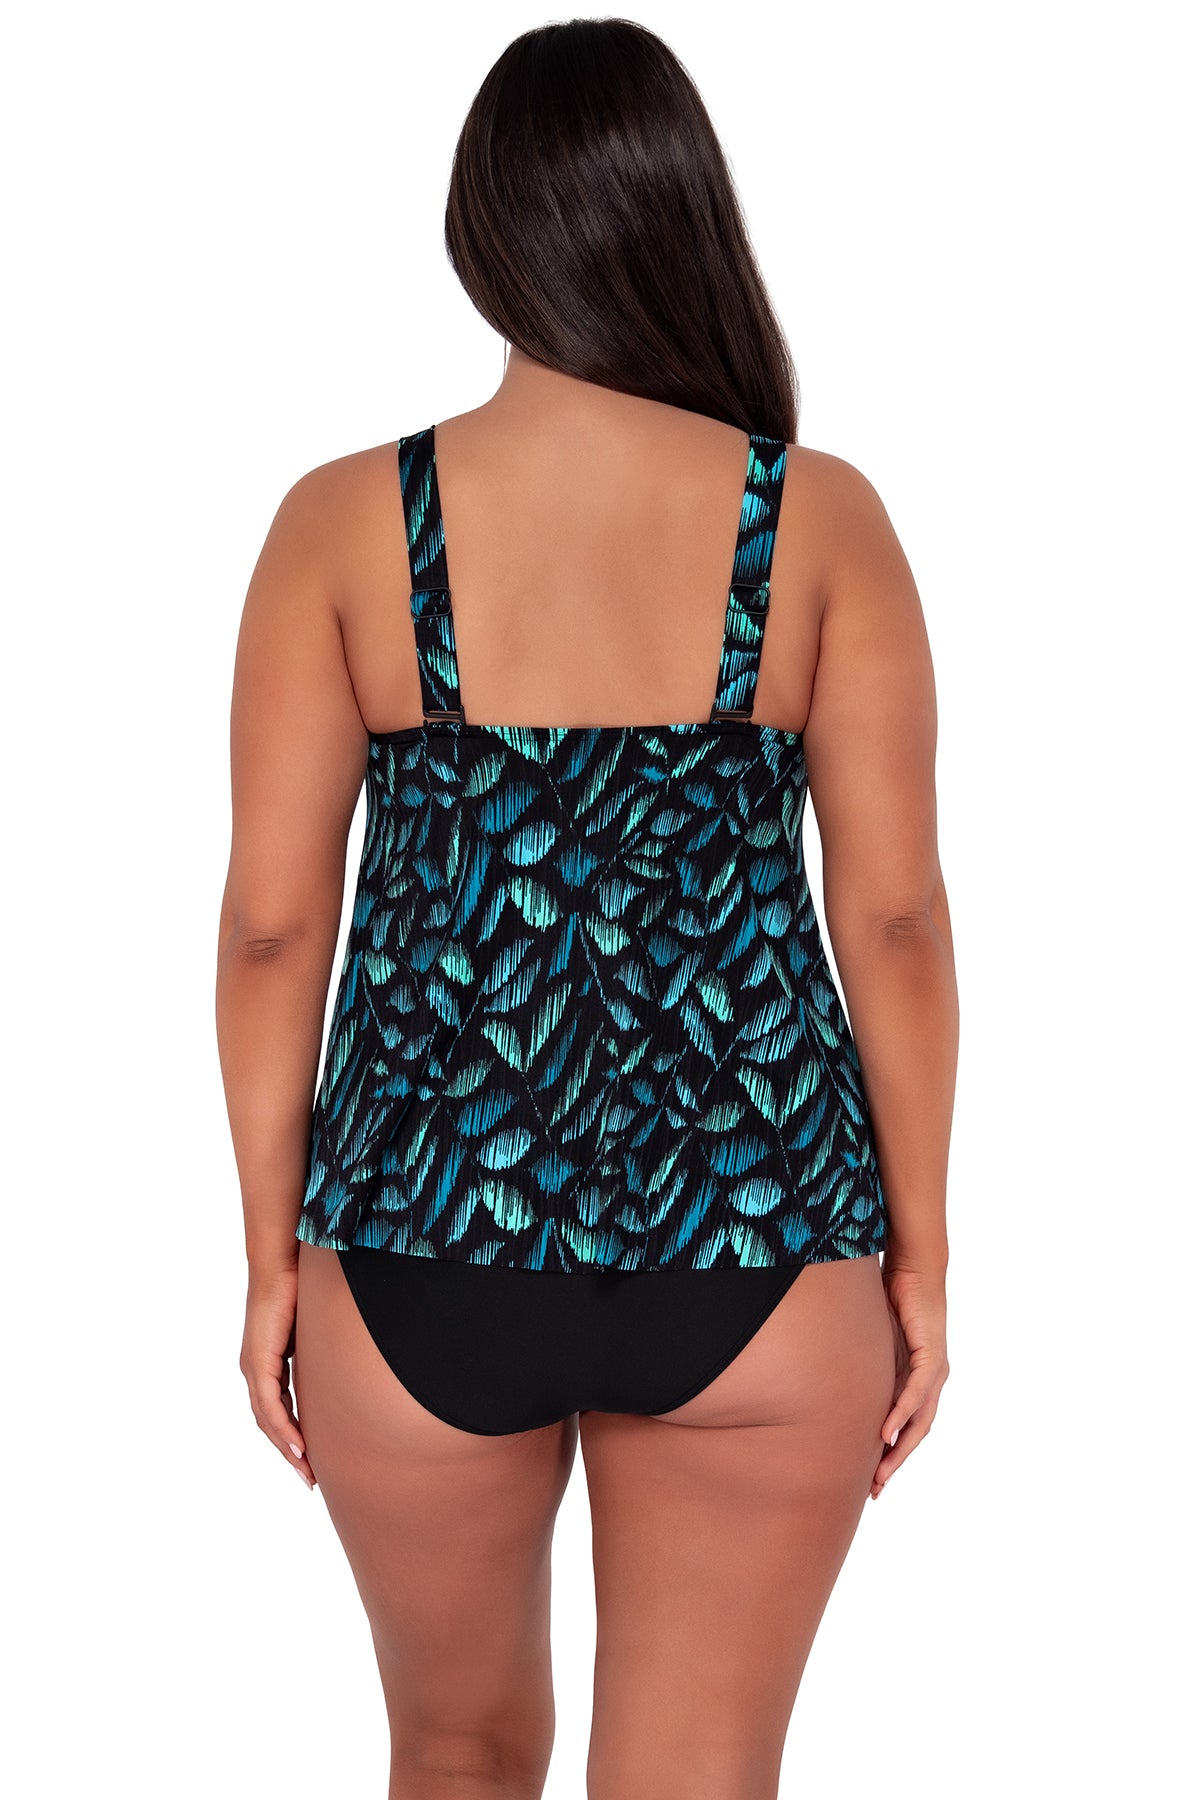 pose #1 of Nicki wearing Sunsets Escape Cascade Seagrass Texture Sadie Tankini Top